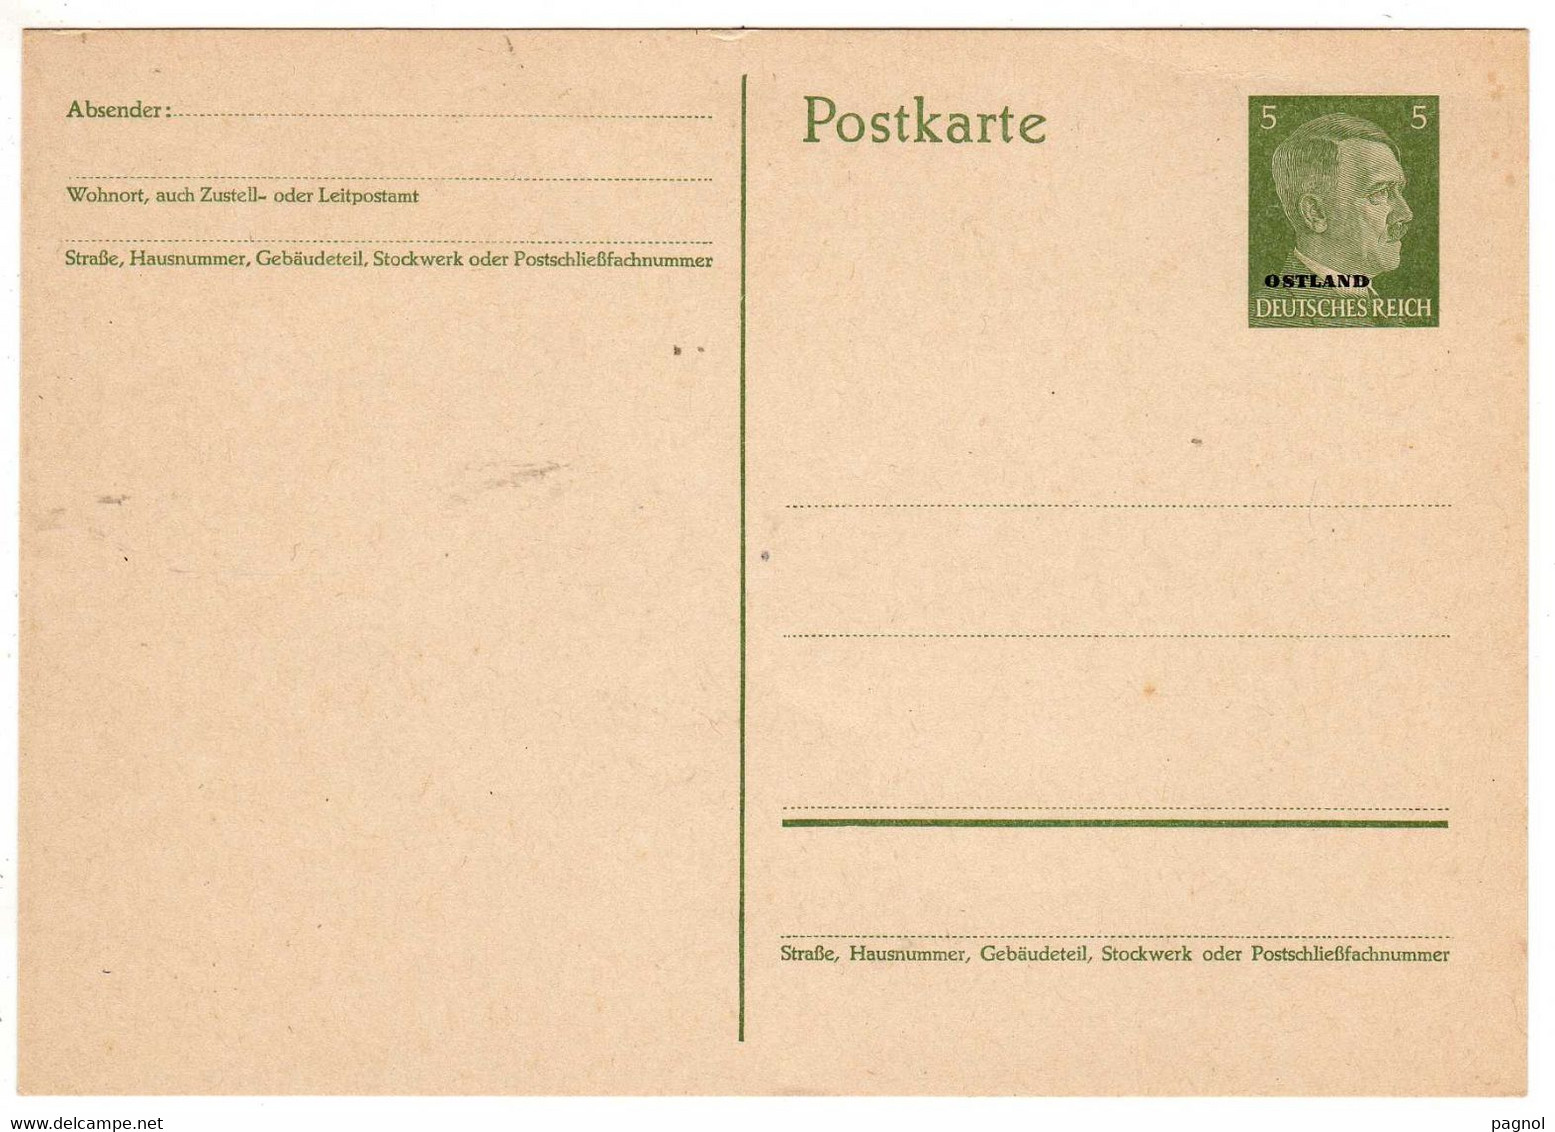 Pays Baltes : Ostland : Entiers Postaux : Occupation Allemagne 1942 - Andere-Europa